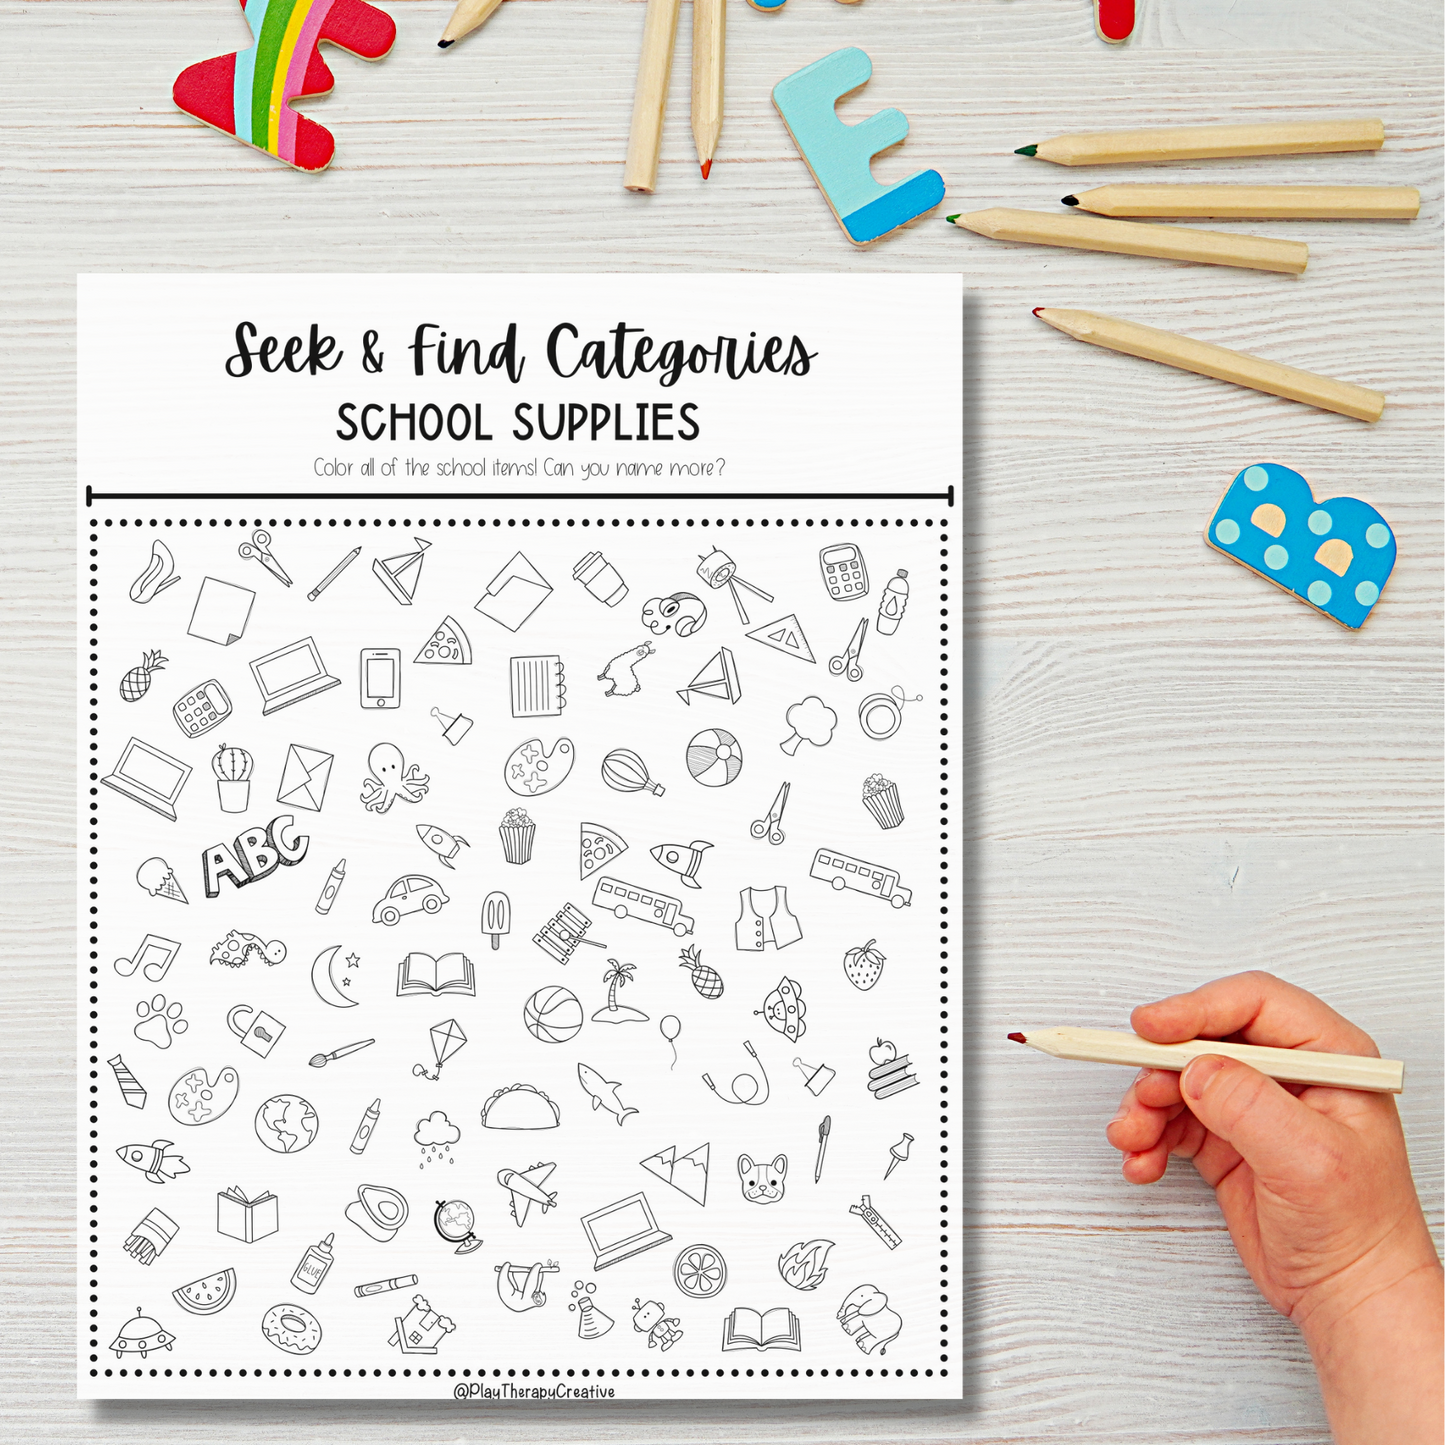 Seek & Find Categories Coloring Pages for Speech & Language Therapy